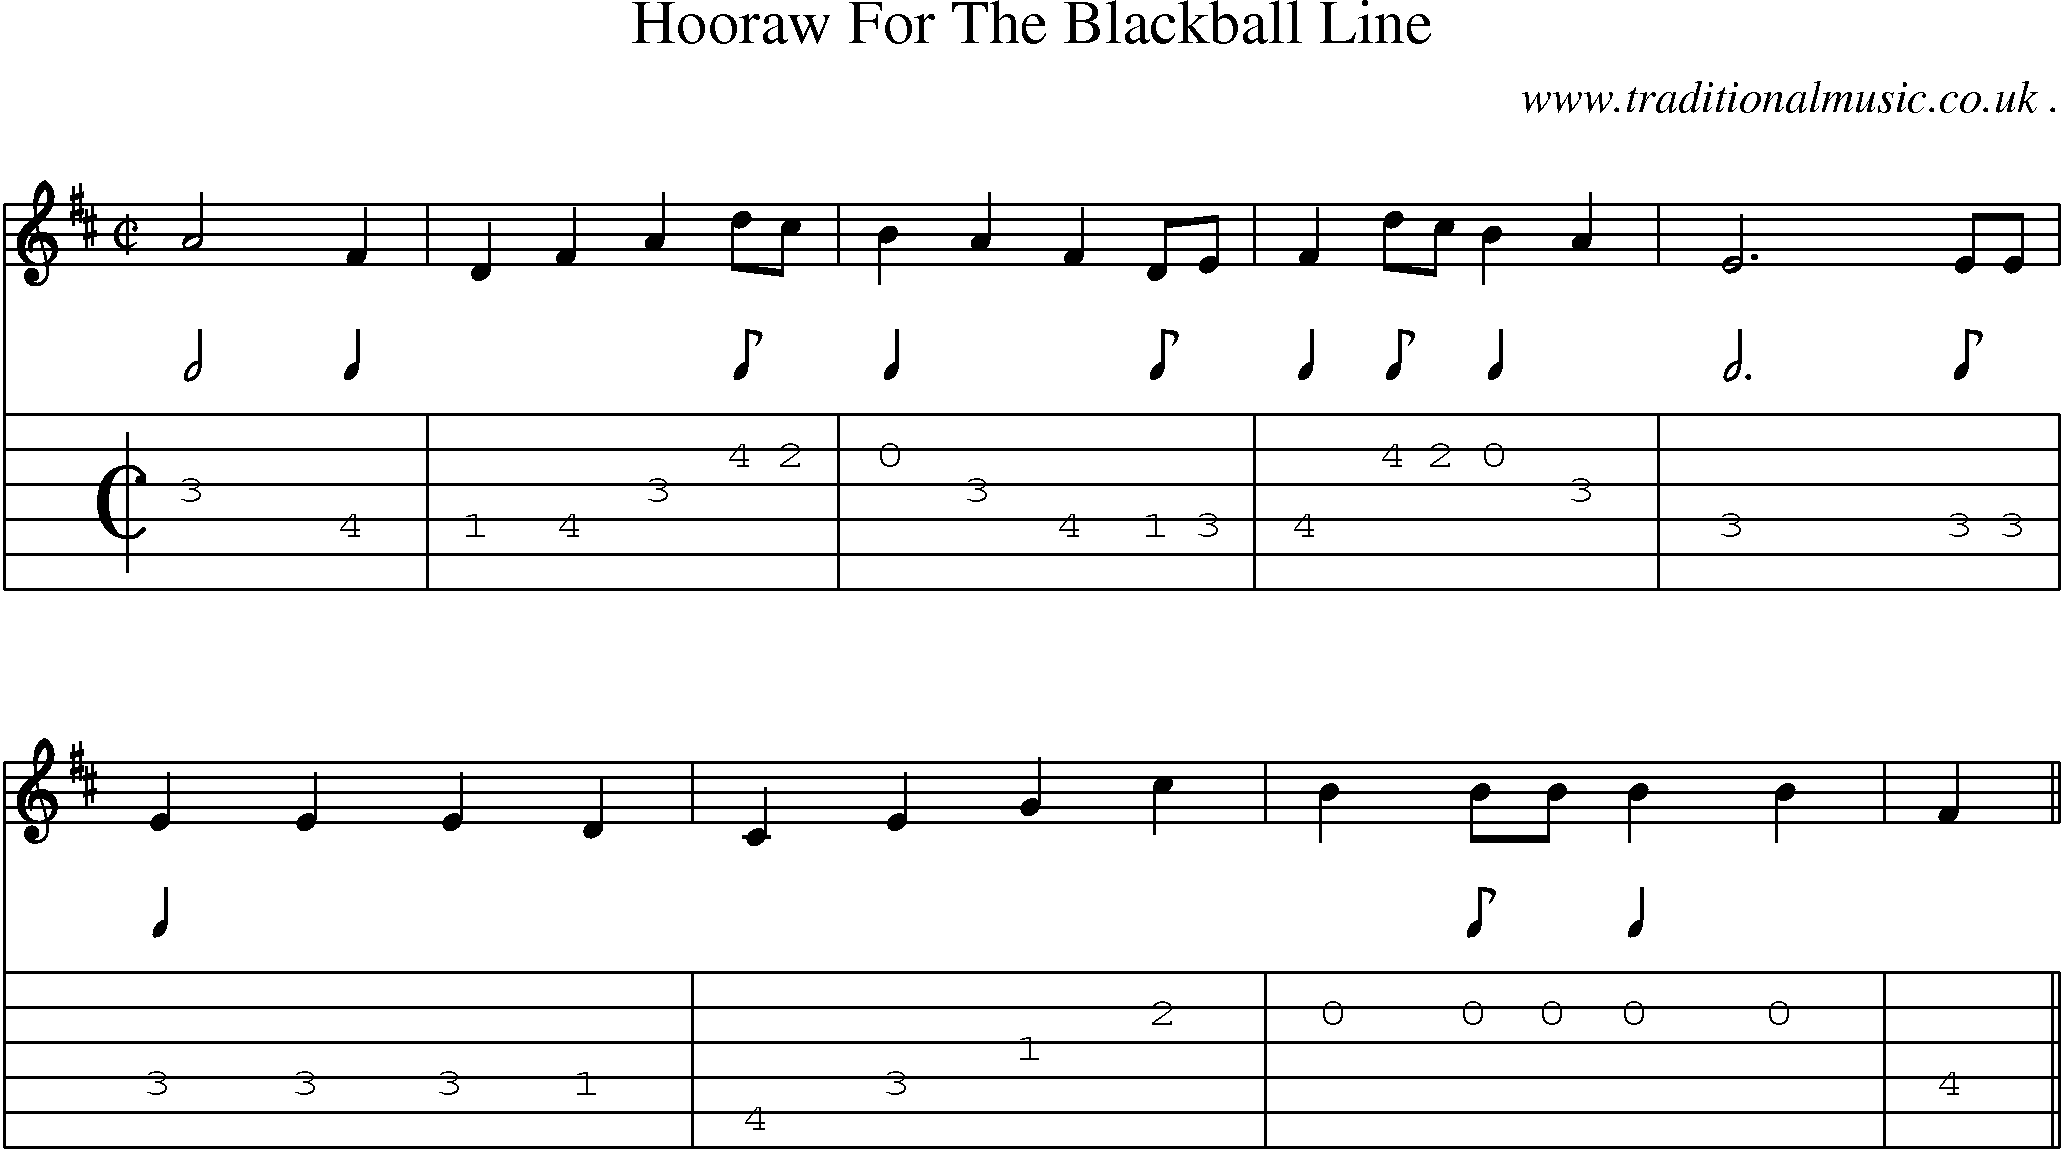 Sheet-Music and Guitar Tabs for Hooraw For The Blackball Line